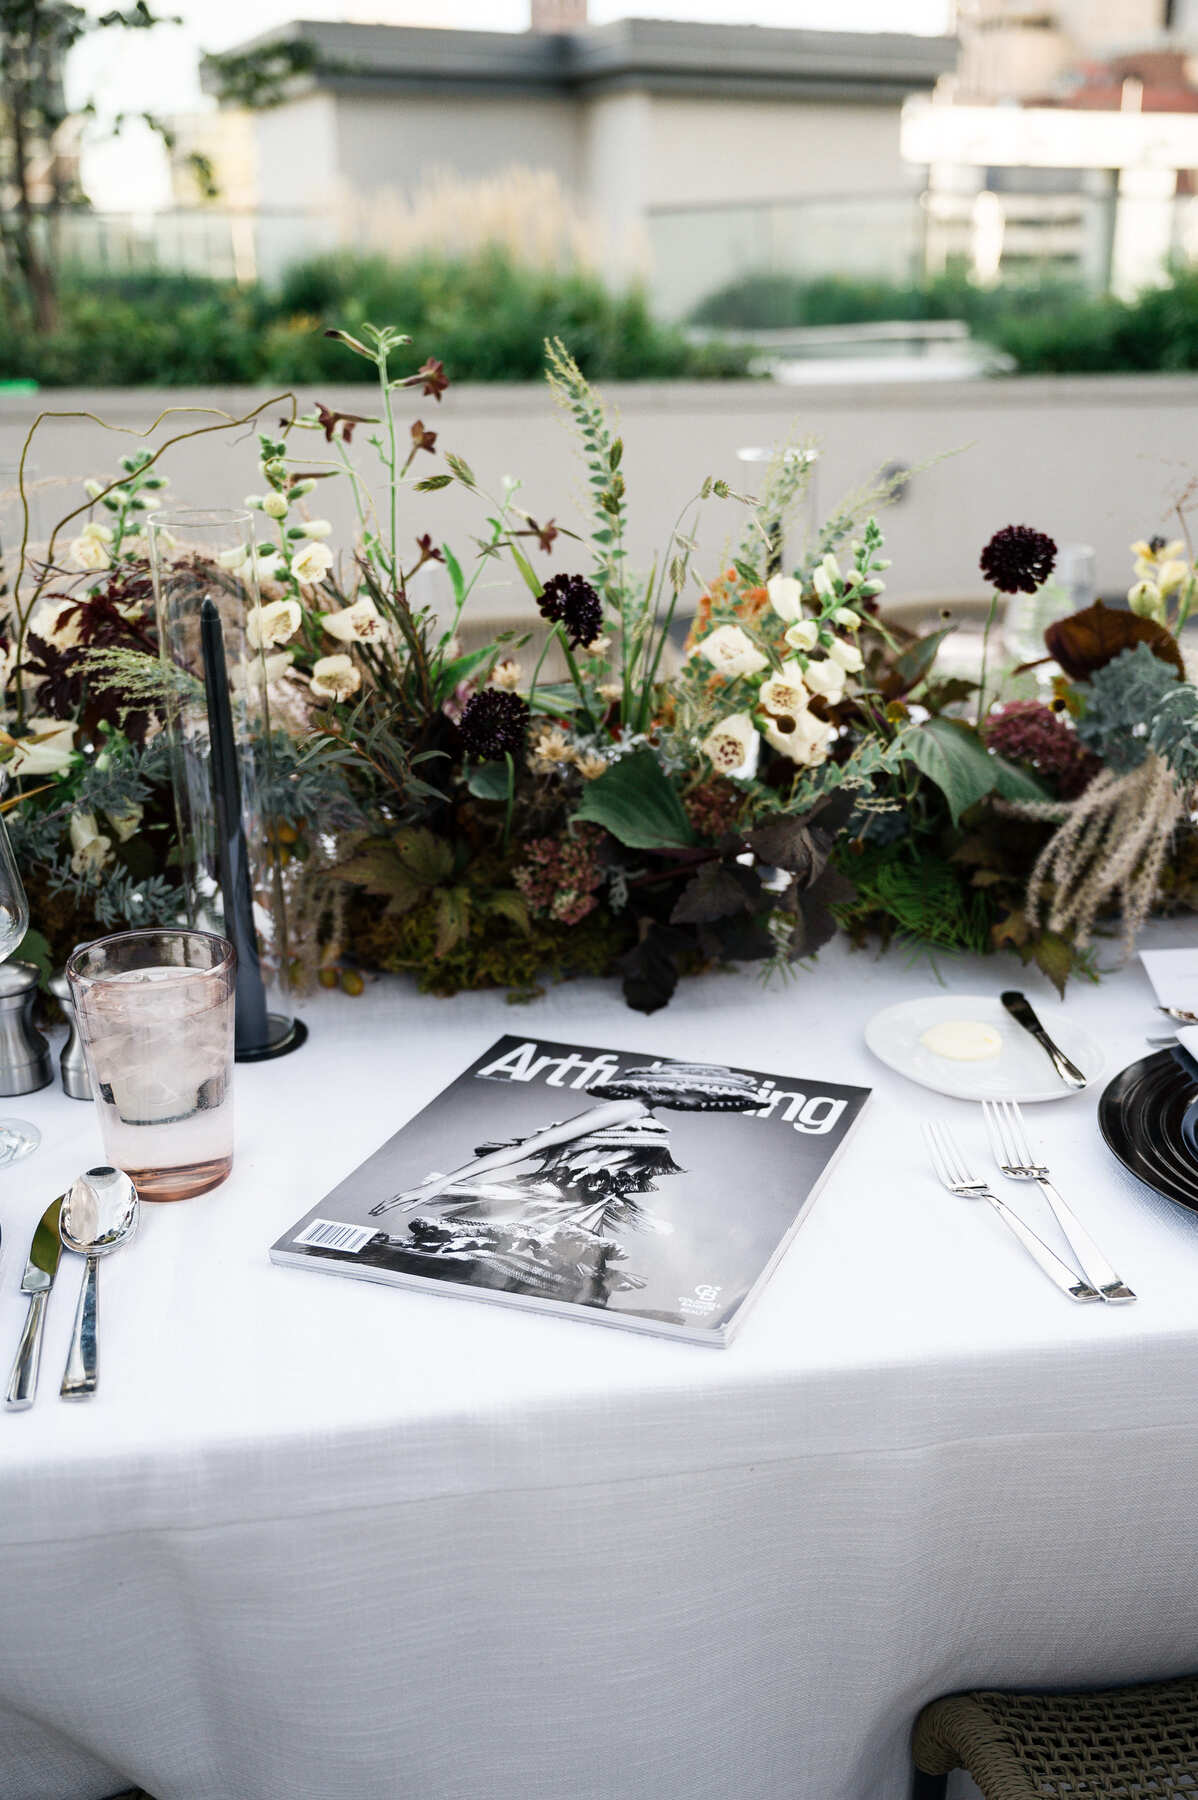 artful living magazine on a table at event